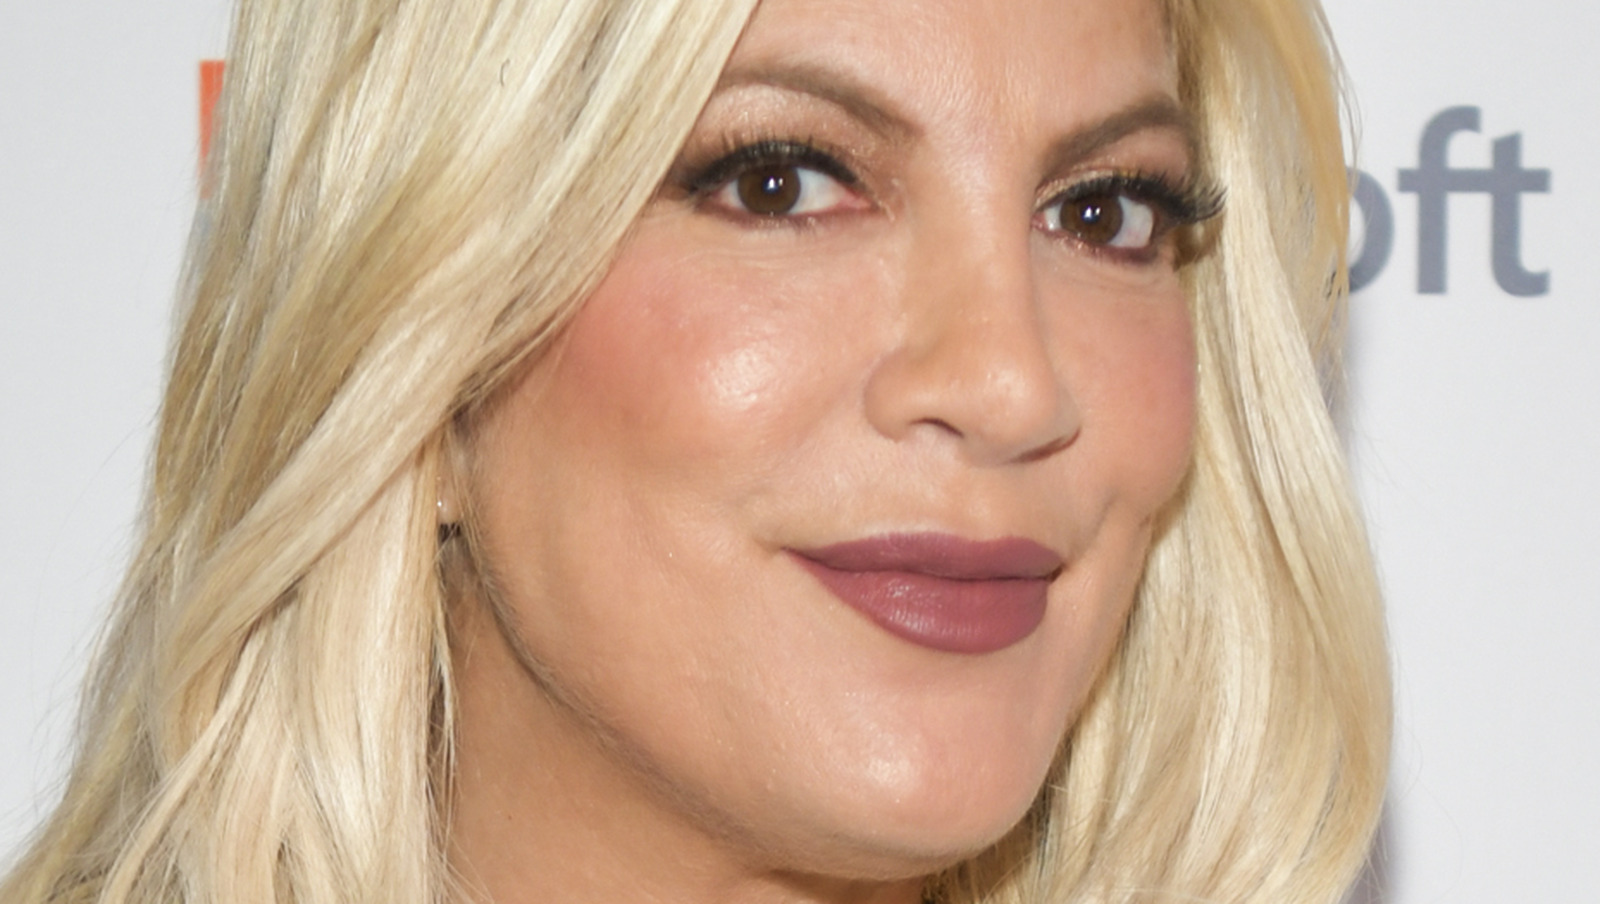 Is Tori Spelling really going to file for Divorce?